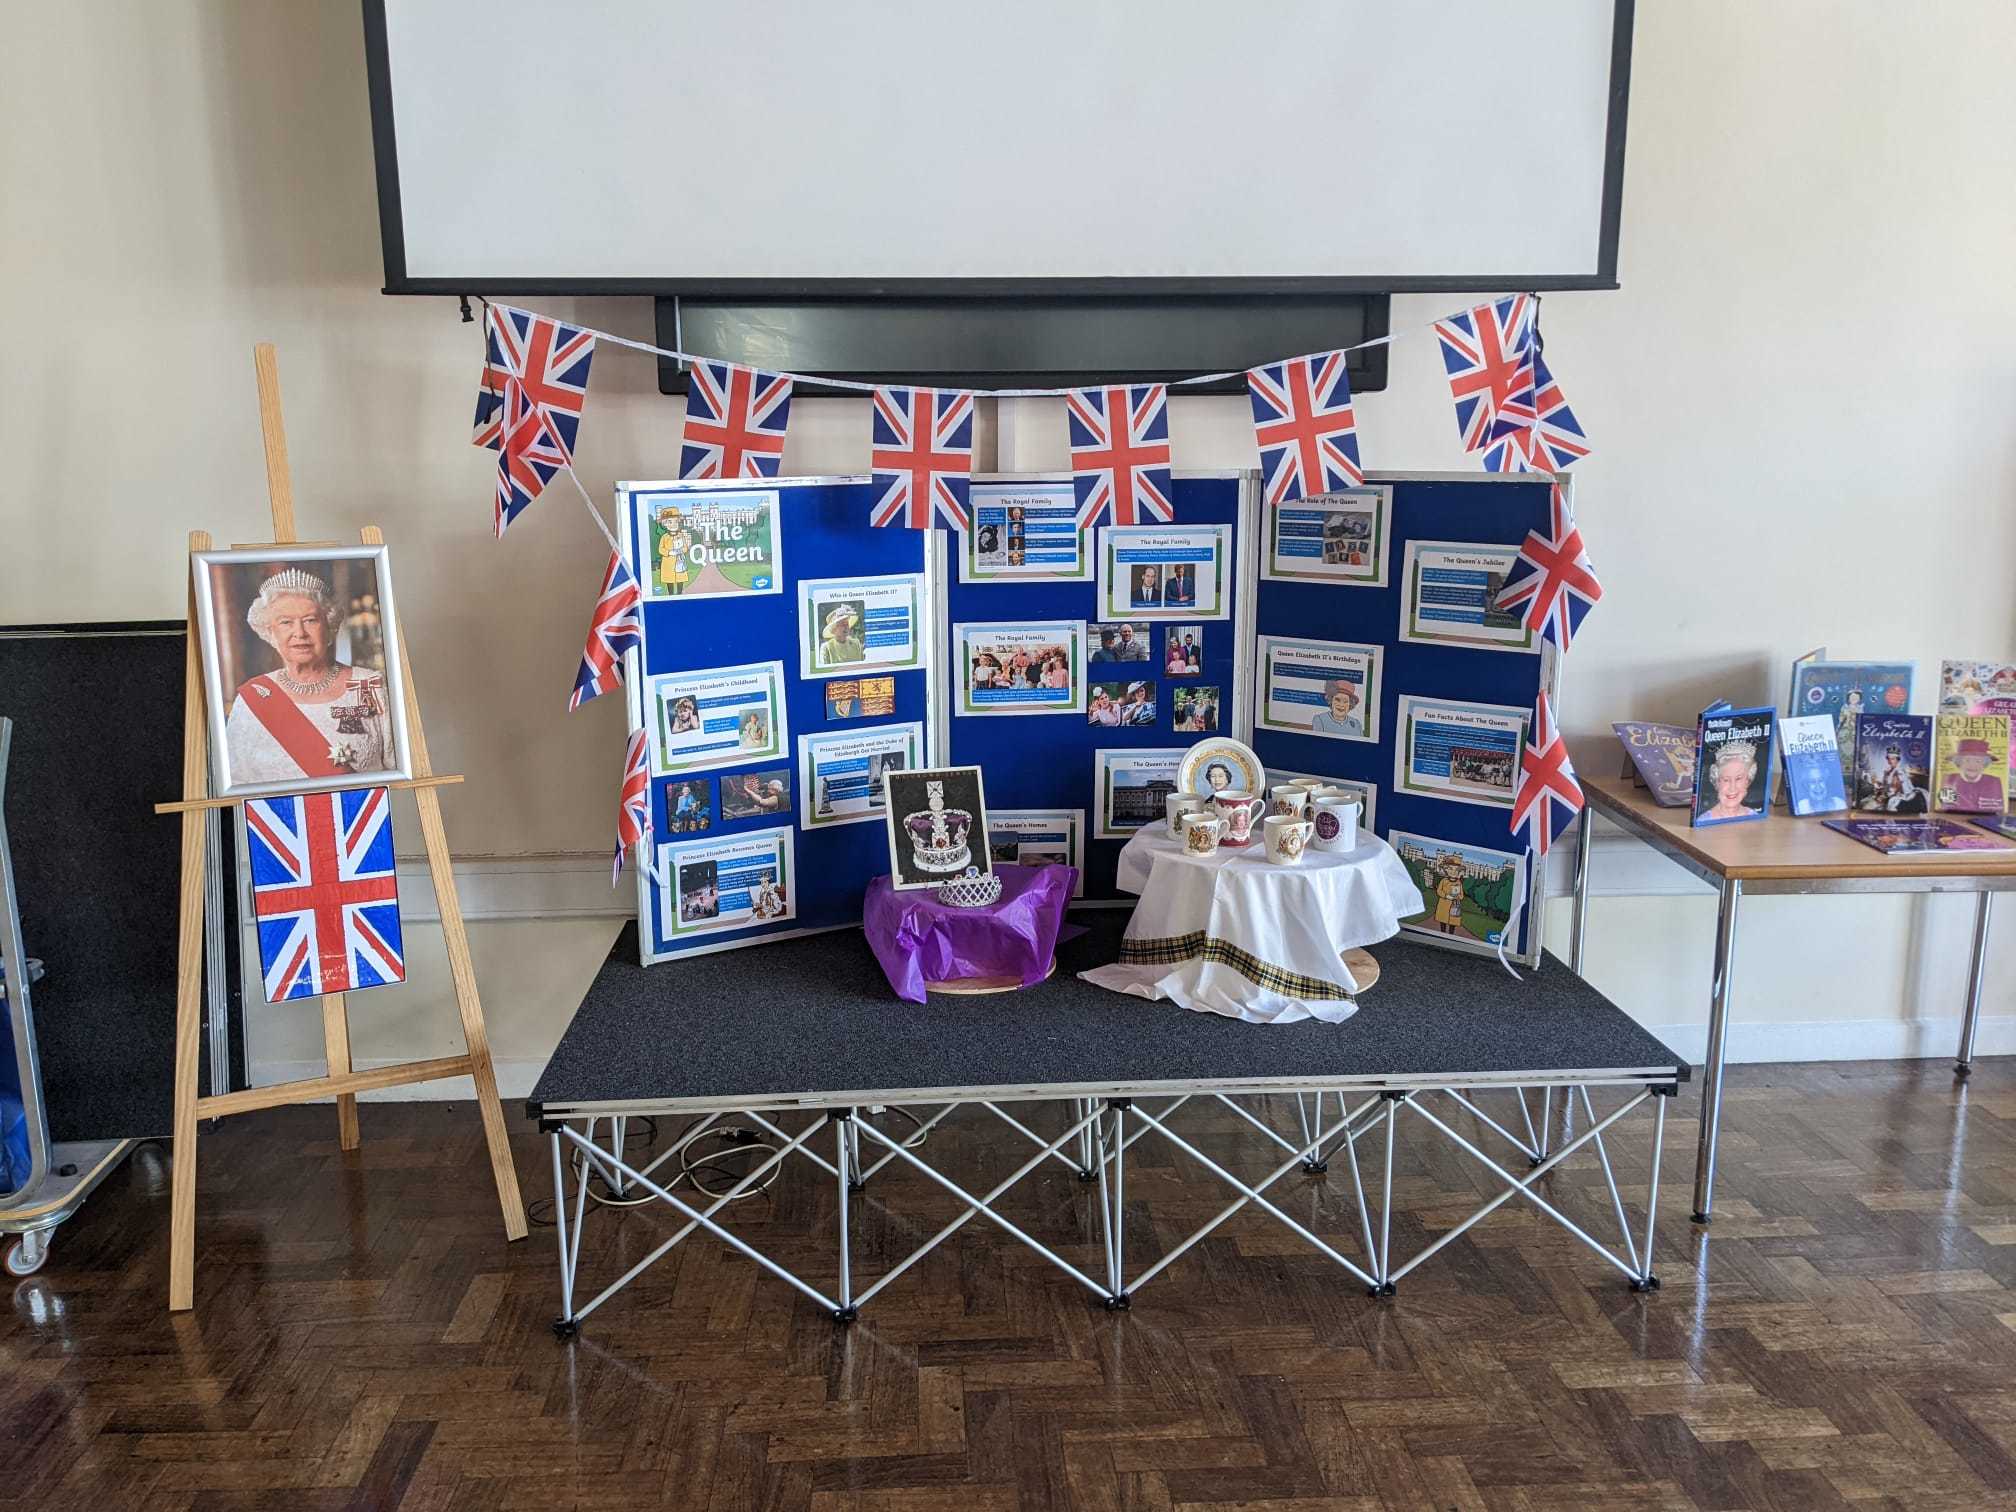 Queens display in the assembely hall, for the children to come and see. Photo: Kate Lockett